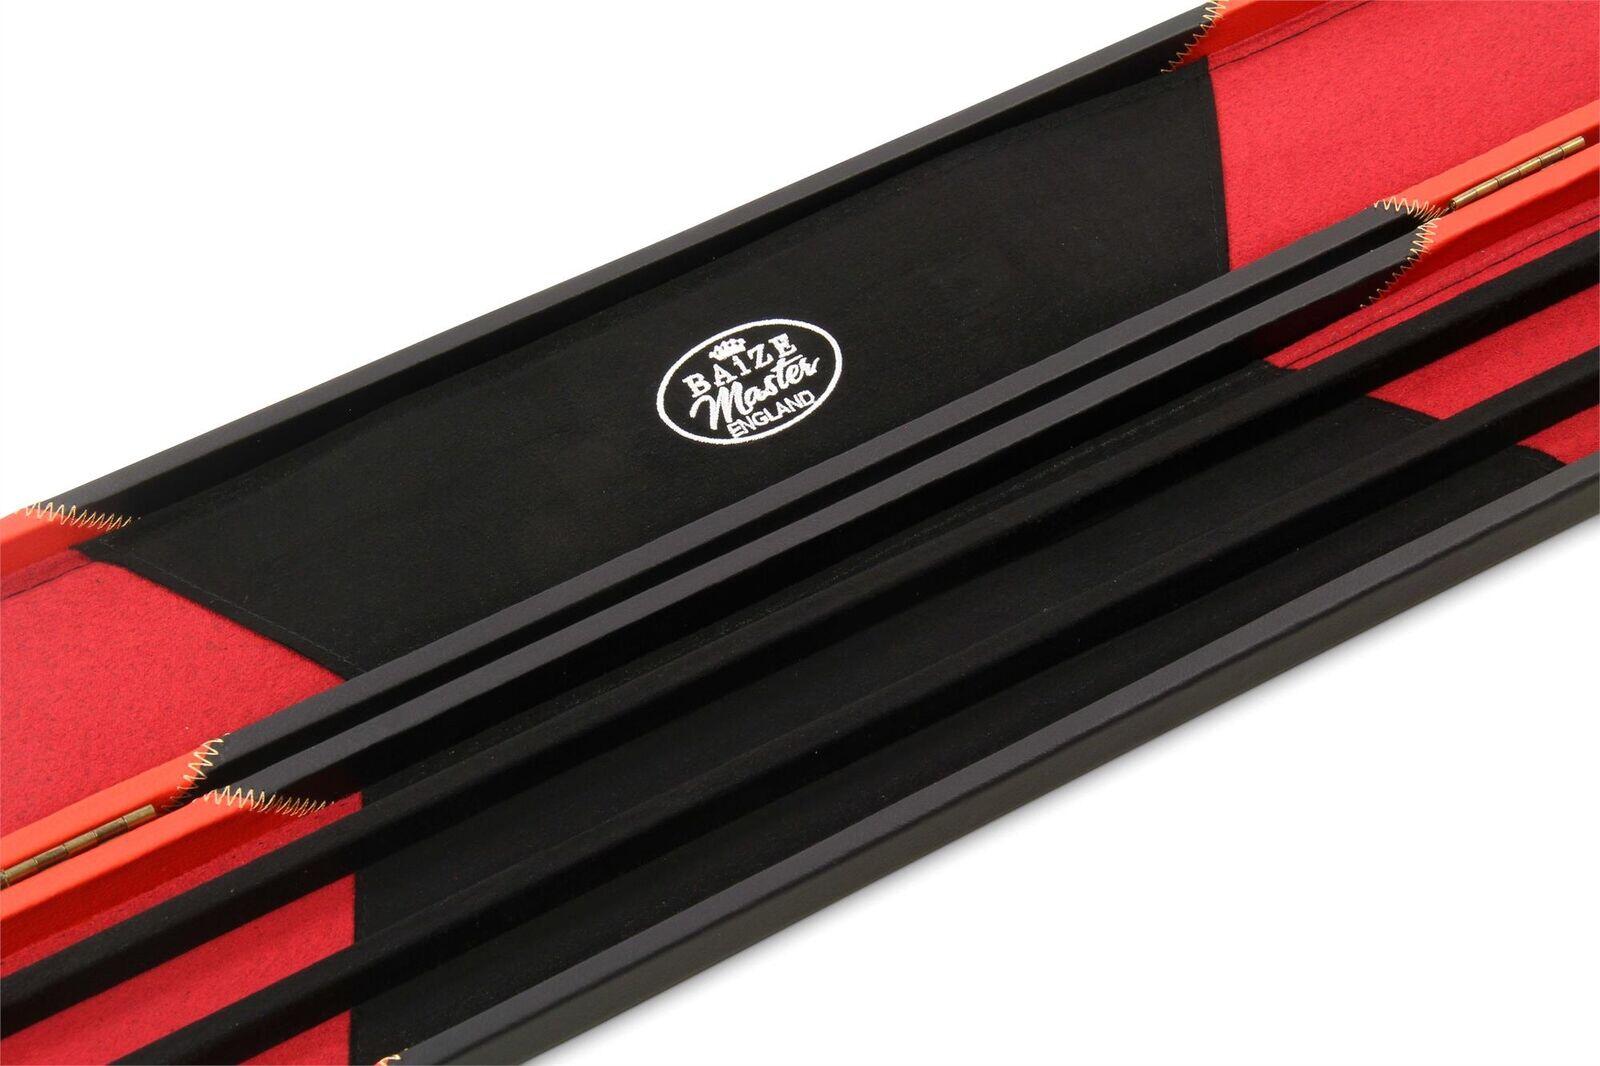 Baize Master 1 Piece WIDE RED ARROW Snooker Pool Cue Case - Holds 3 Cues 6/7